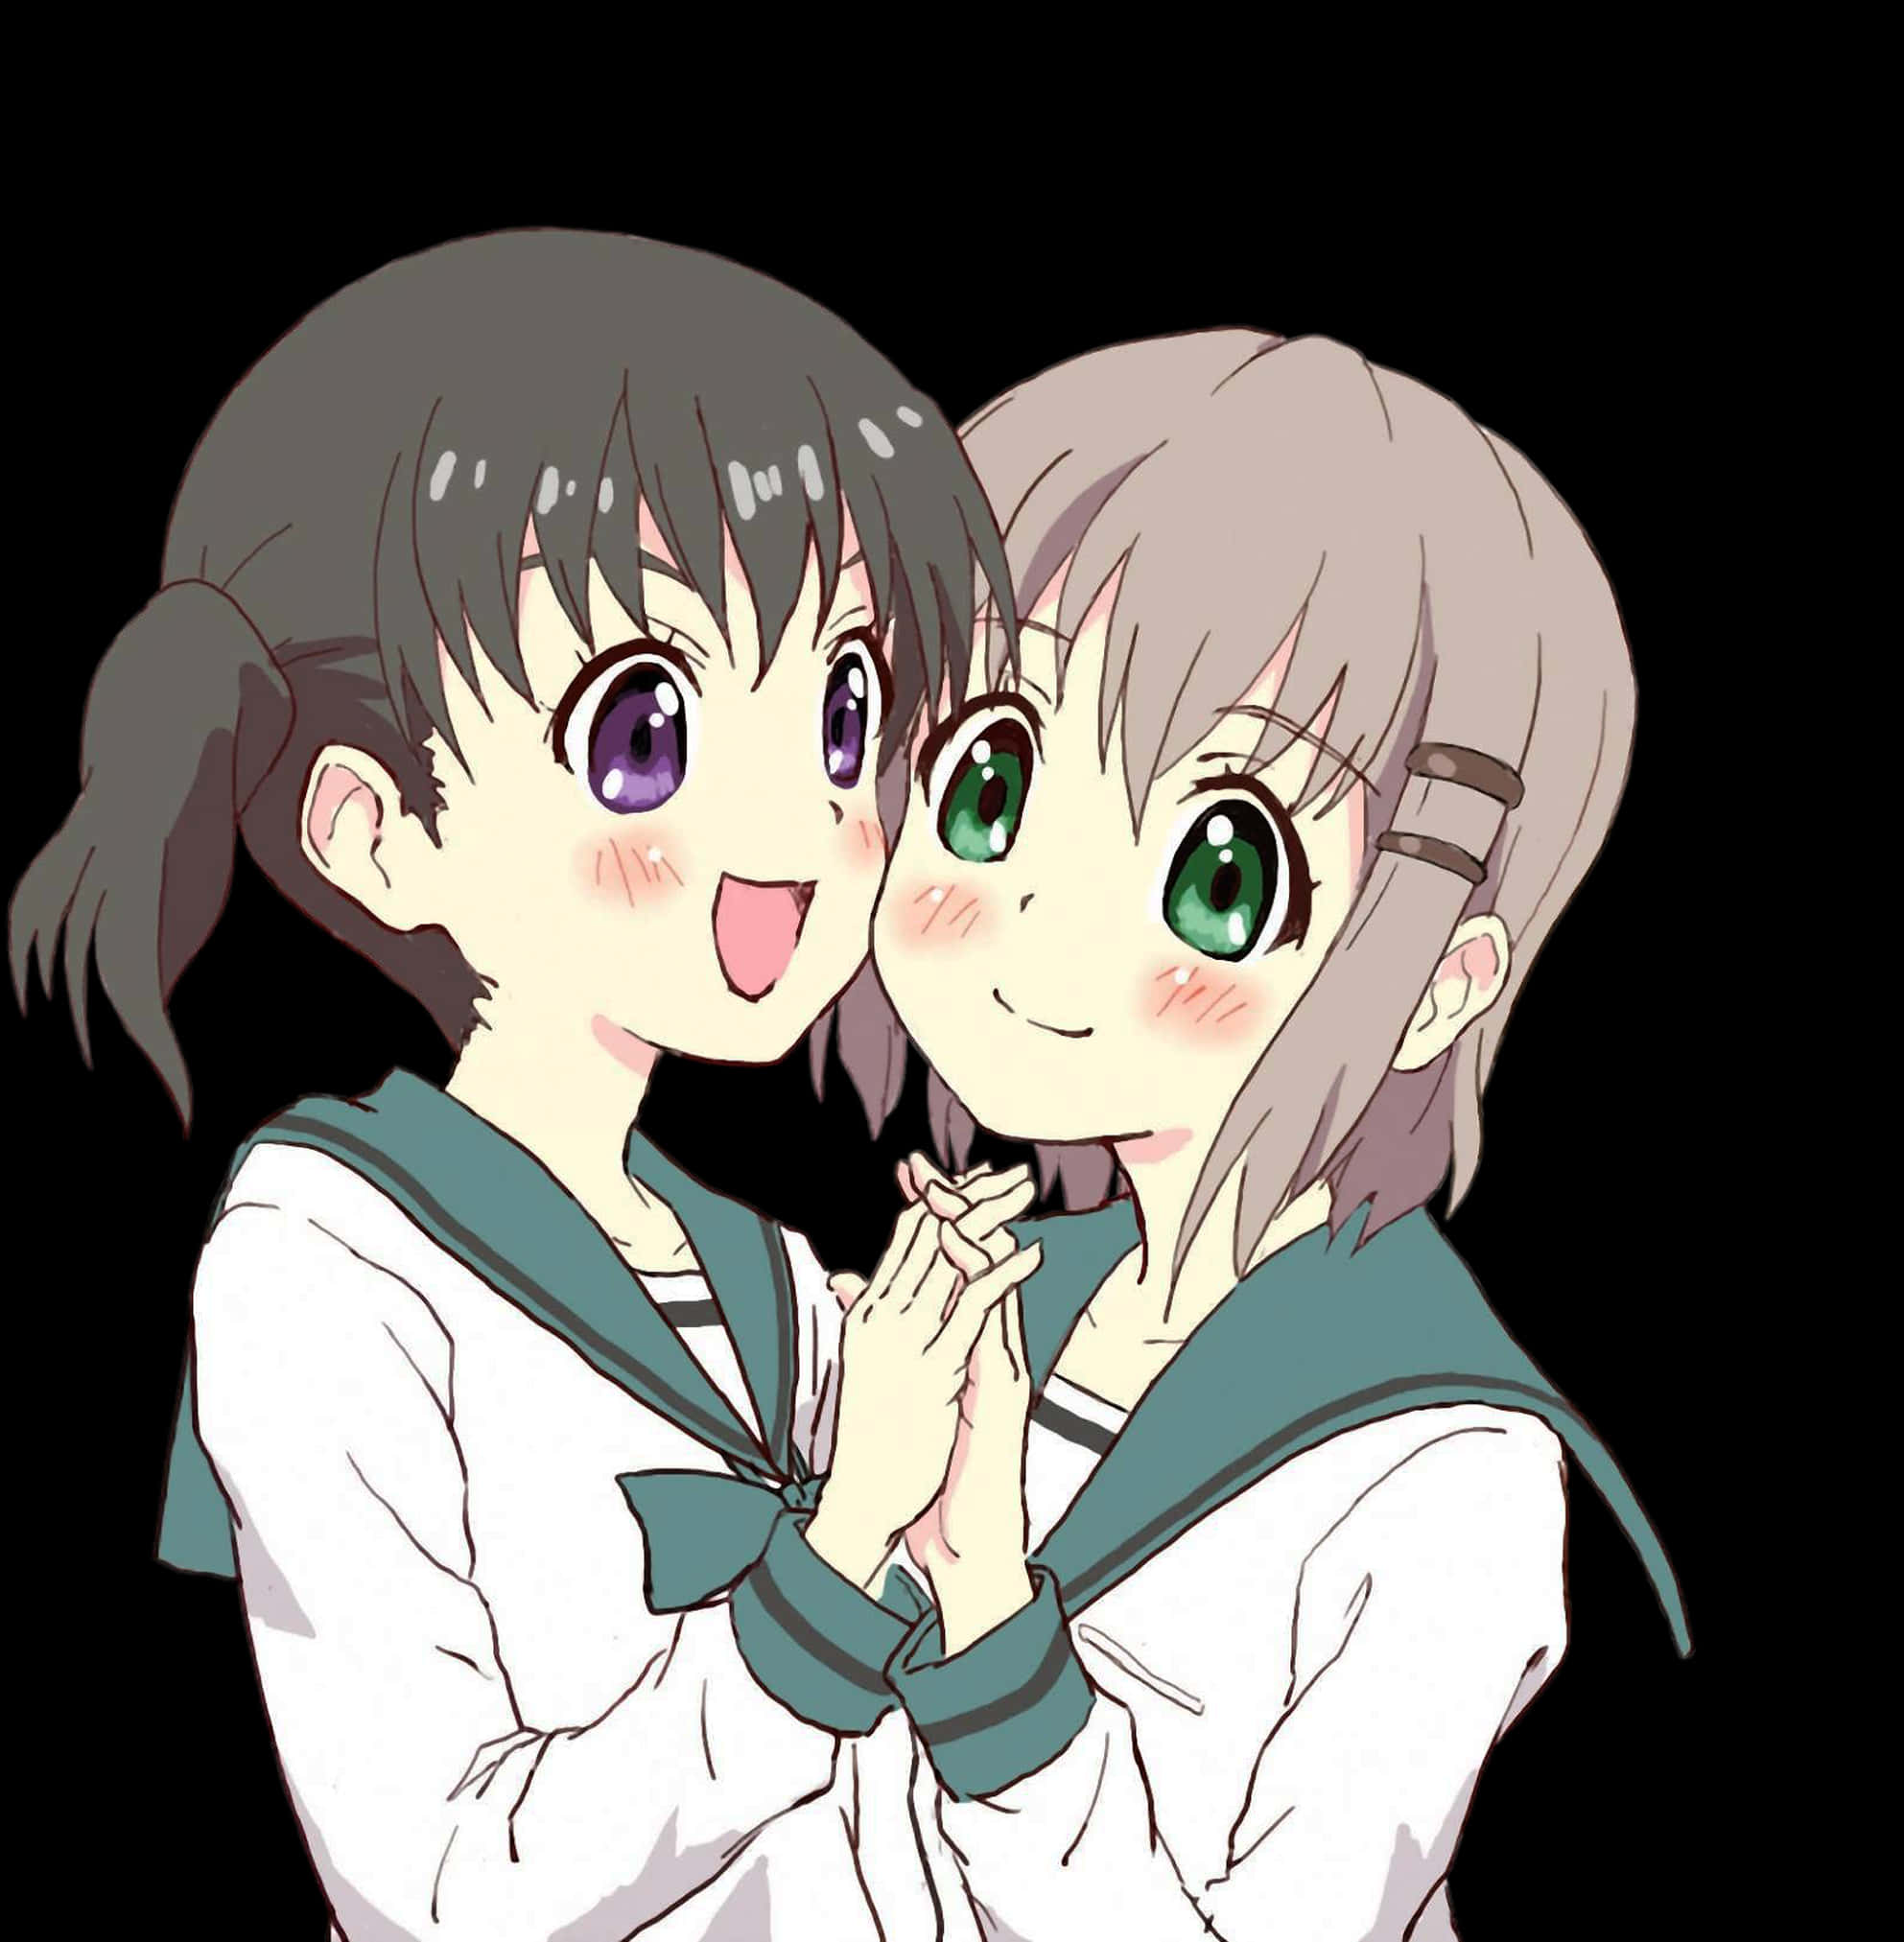 A Couple Of Girls In School Uniforms